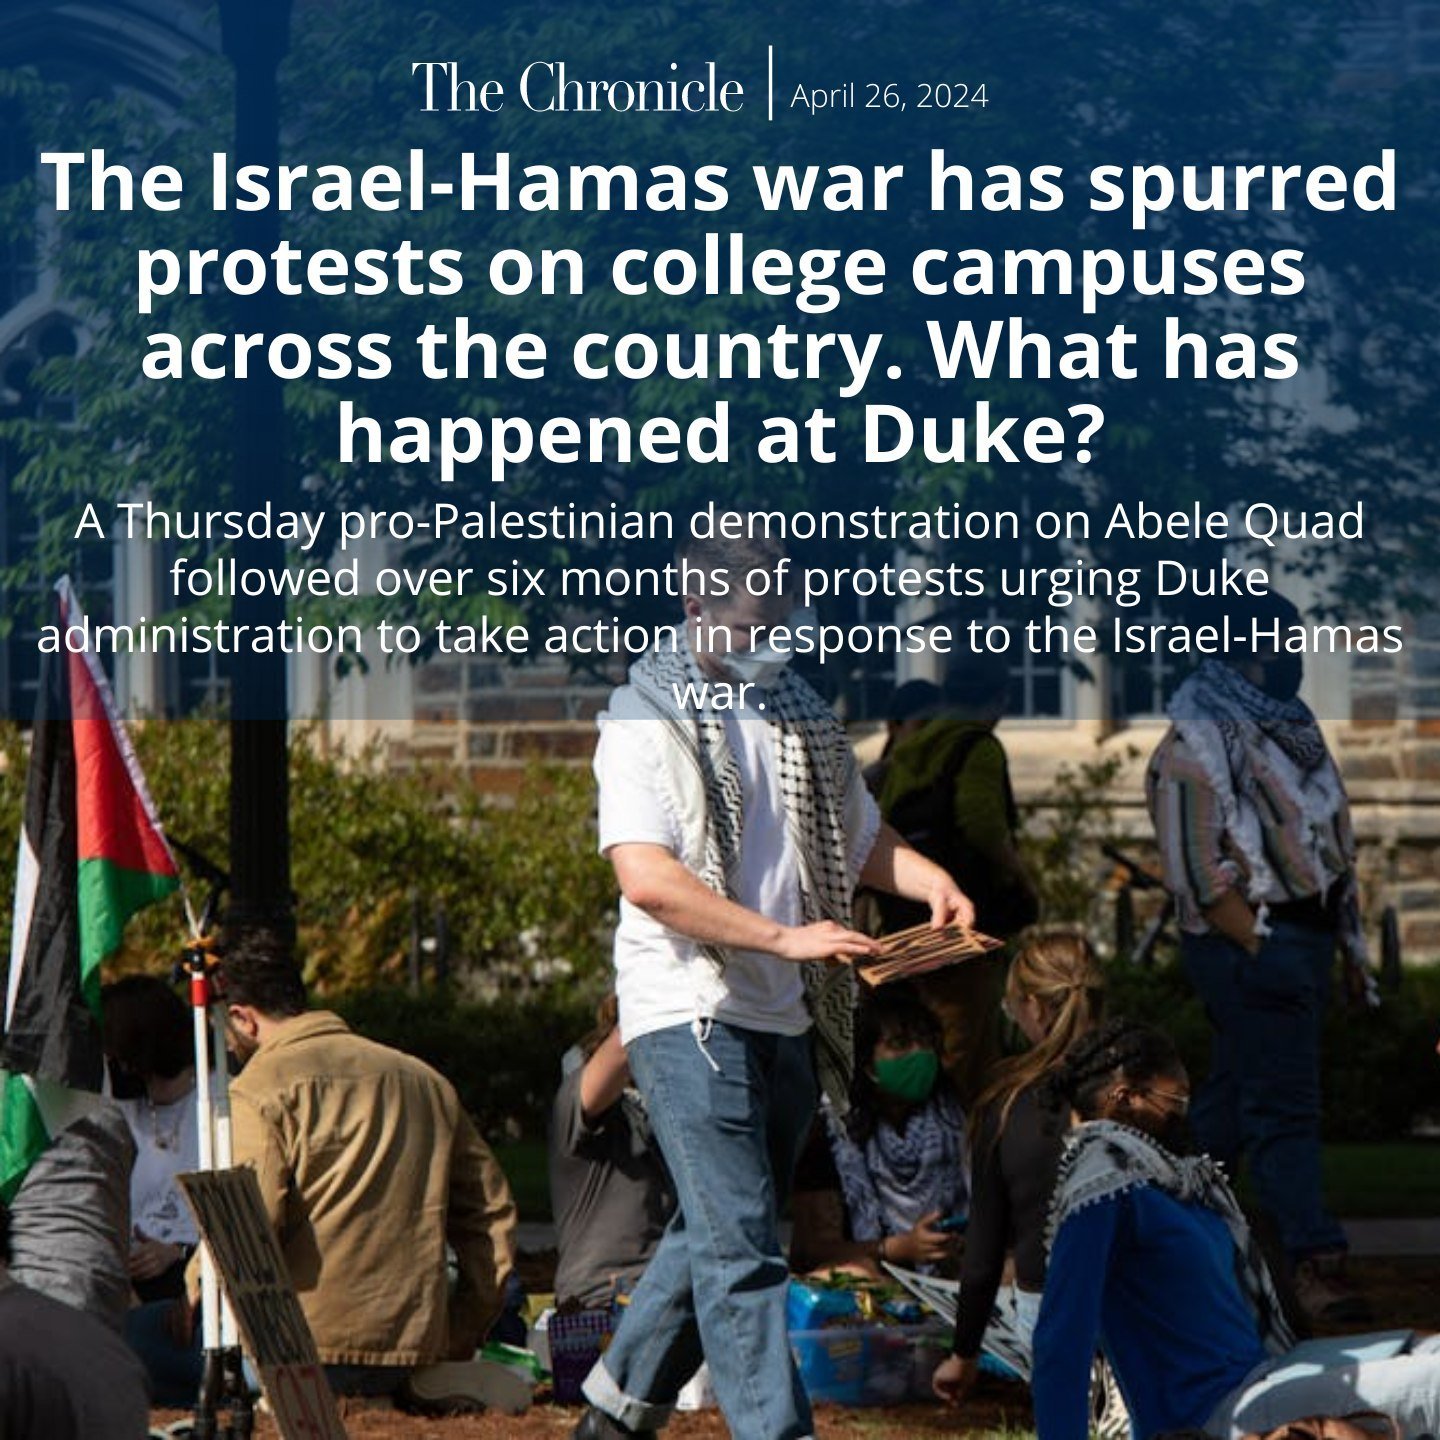 Hundreds of students have been arrested at college campuses across the country amidst a flare-up of pro-Palestinian encampments and demonstrations in response to the Israel-Hamas war. Although Duke has not garnered the national attention of its peer 